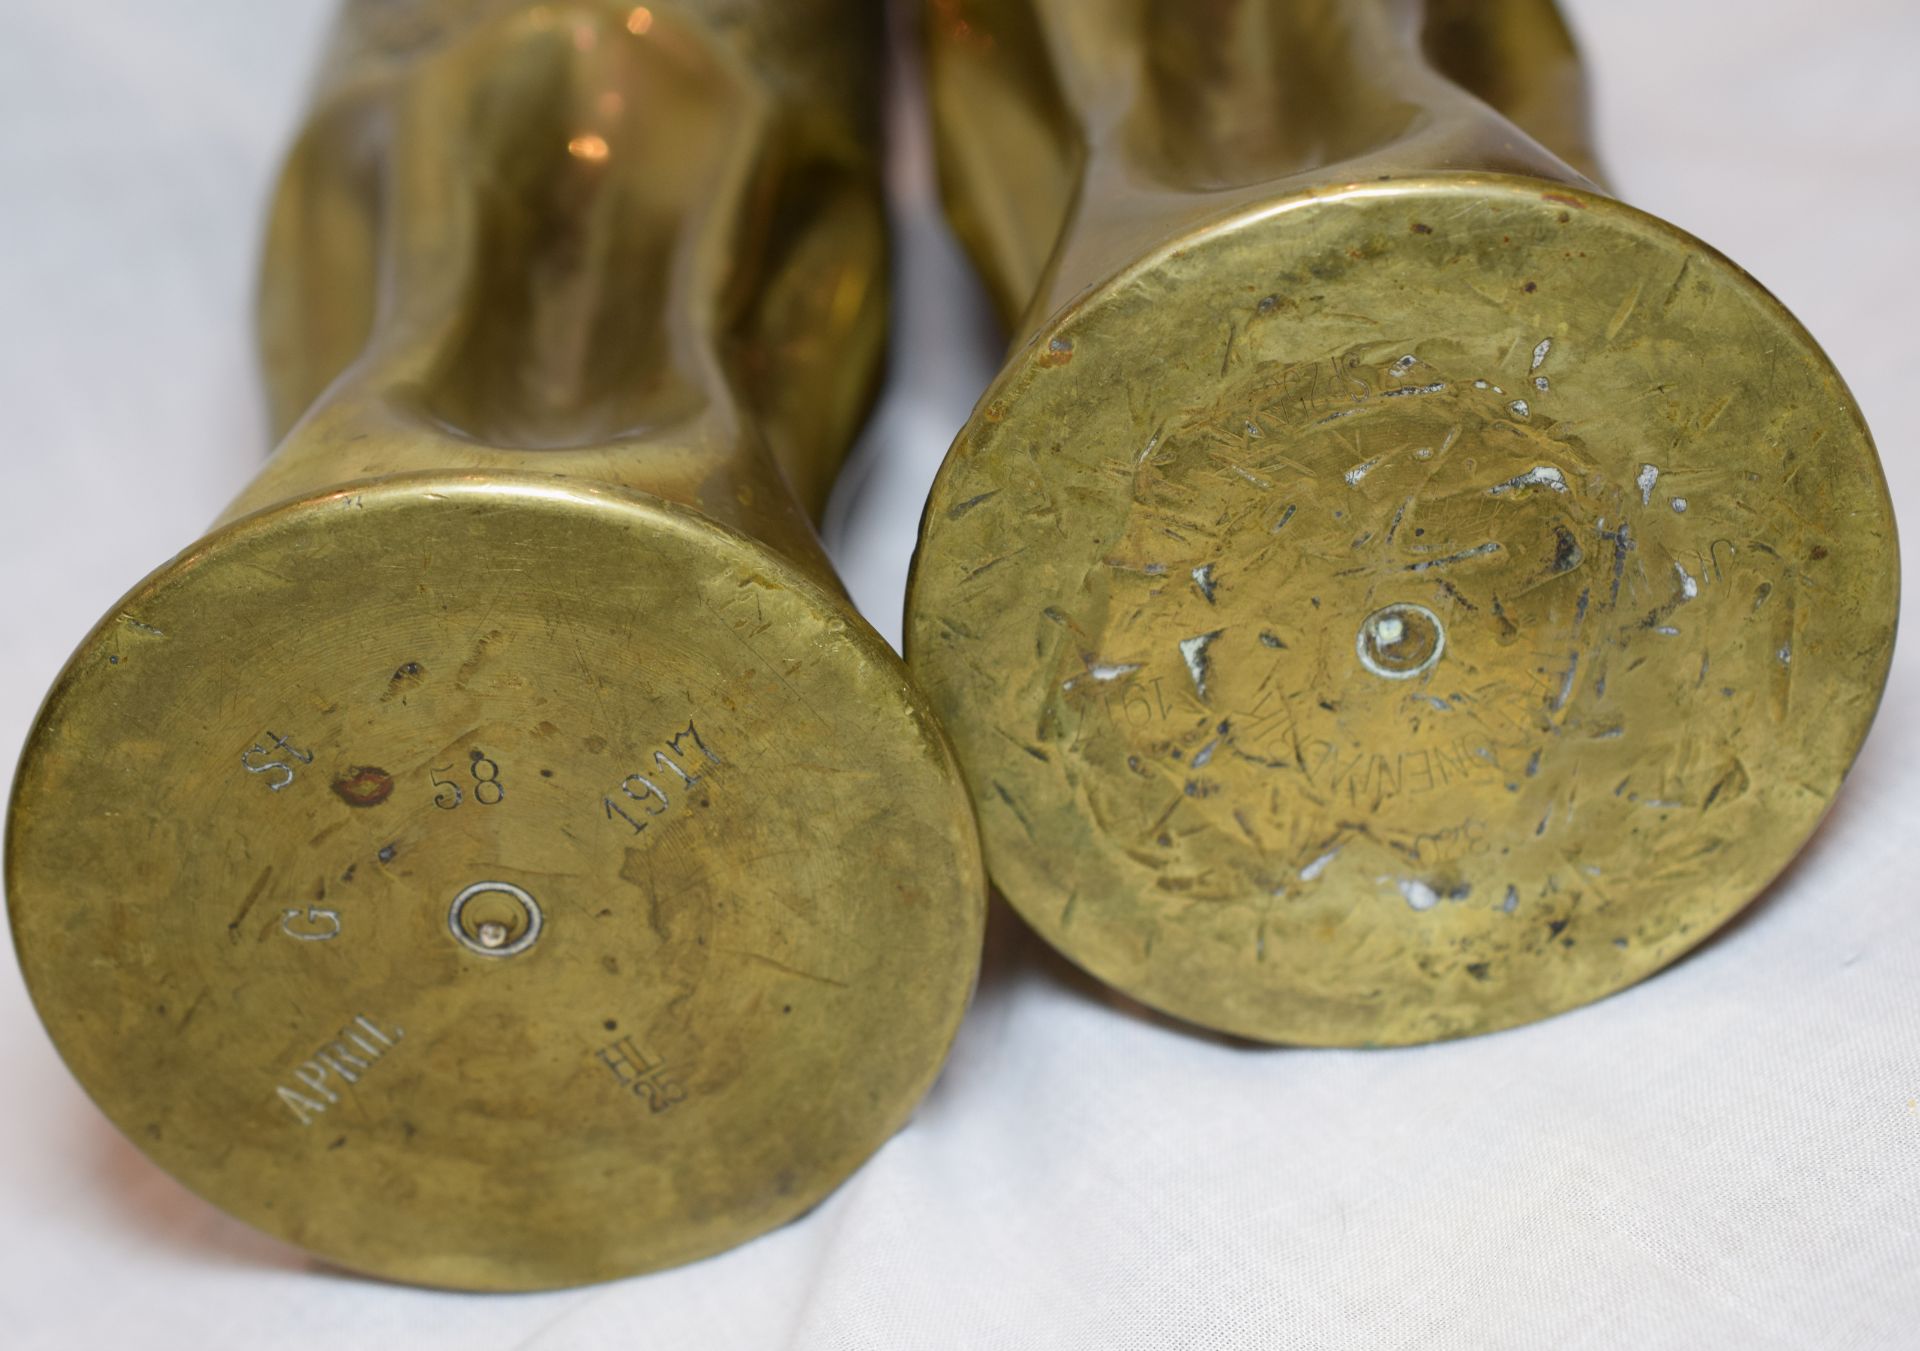 1917 WW1 French Brass Shells Cases Trench Art - Image 3 of 5